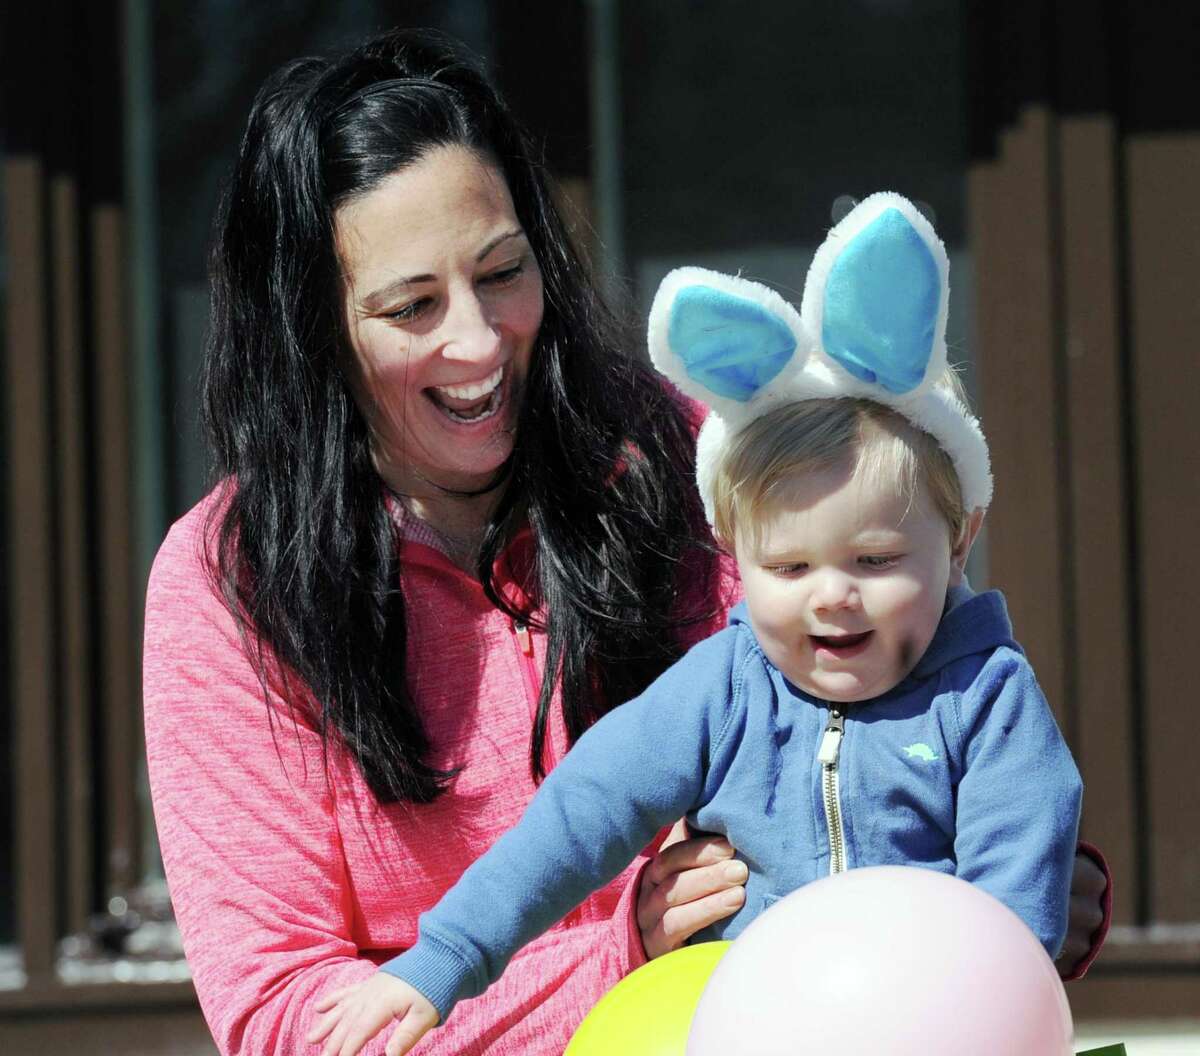 Cindy Horrmann of Old Greenwich smiles along with her son Jack, 15-months, as the pair played with balloons during the Presbyterian Church of Old Greenwich Easter Egg Hunt at the church in Old Greenwich, Conn., Saturday morning, April 8, 2017.